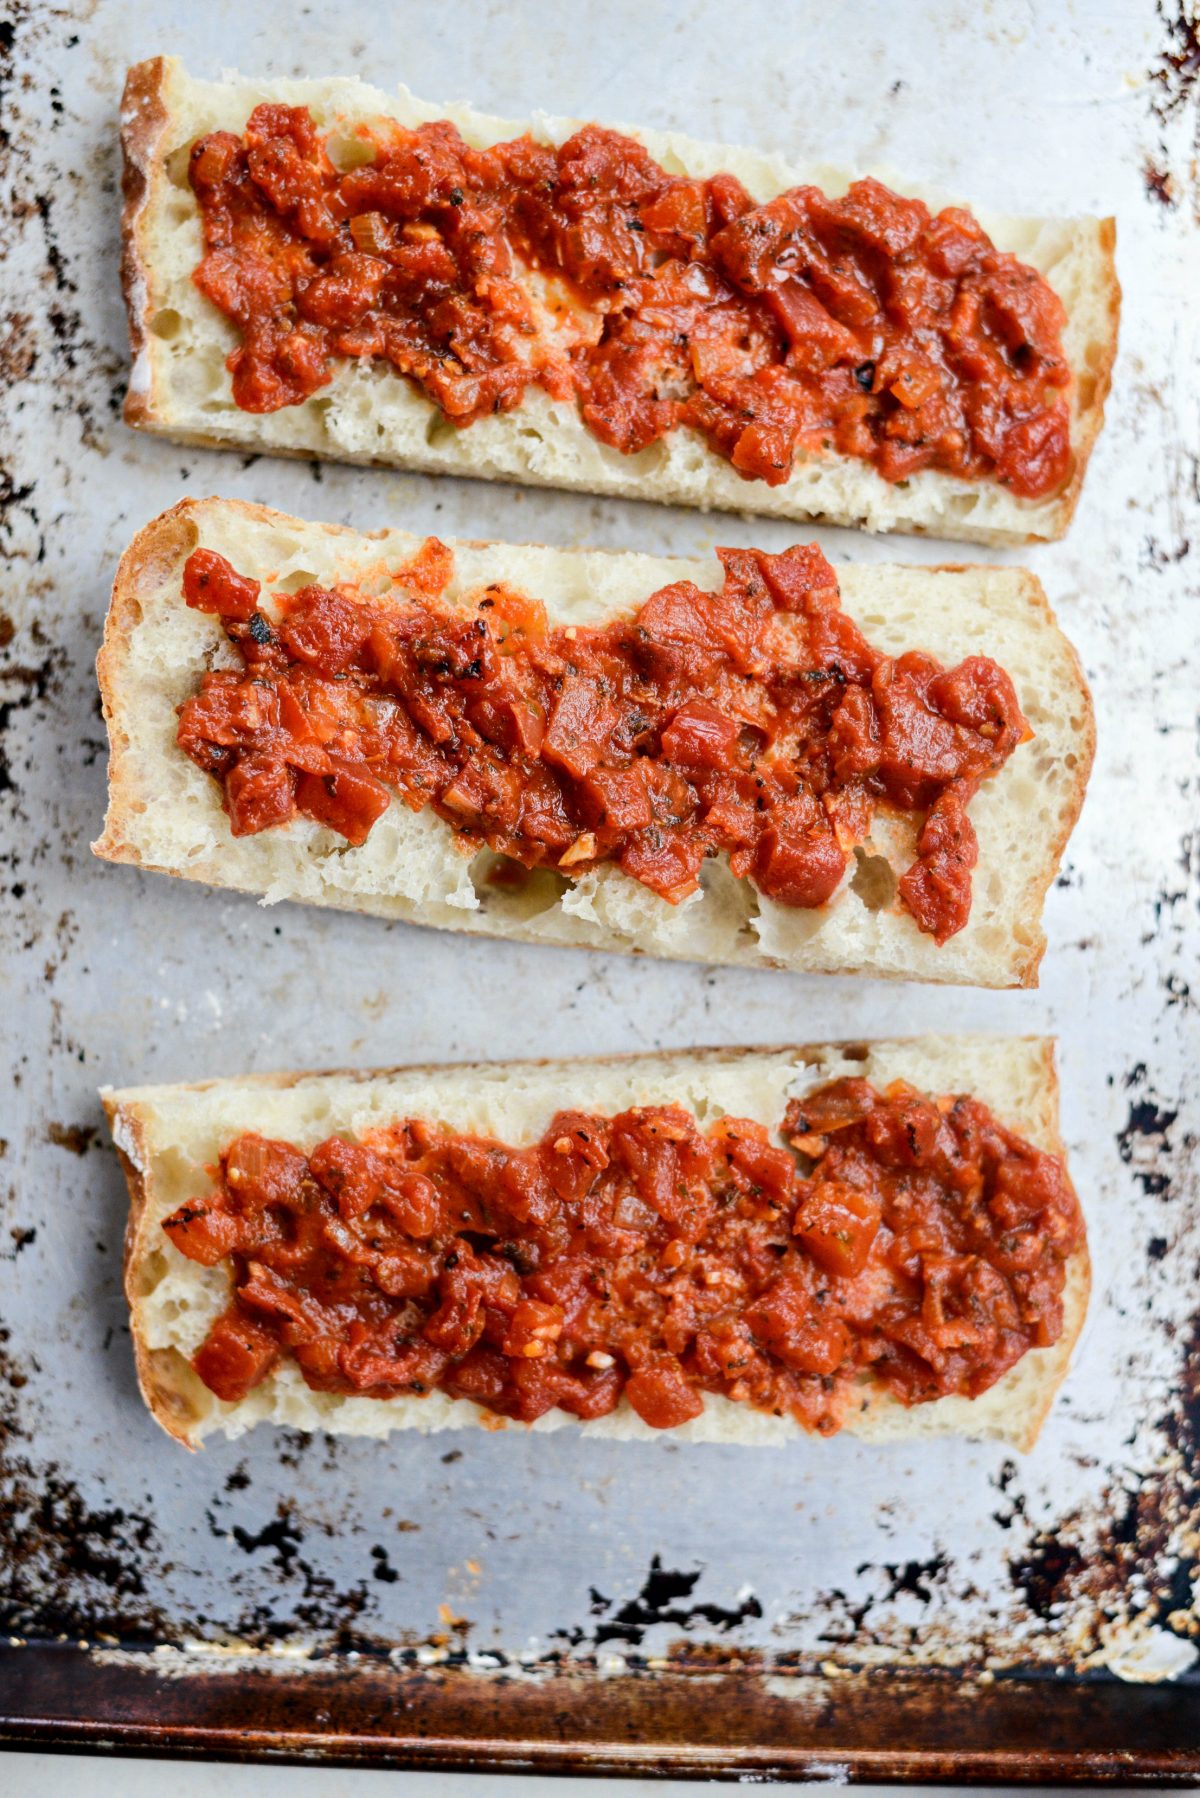 fire-roasted pizza sauce on focaccia